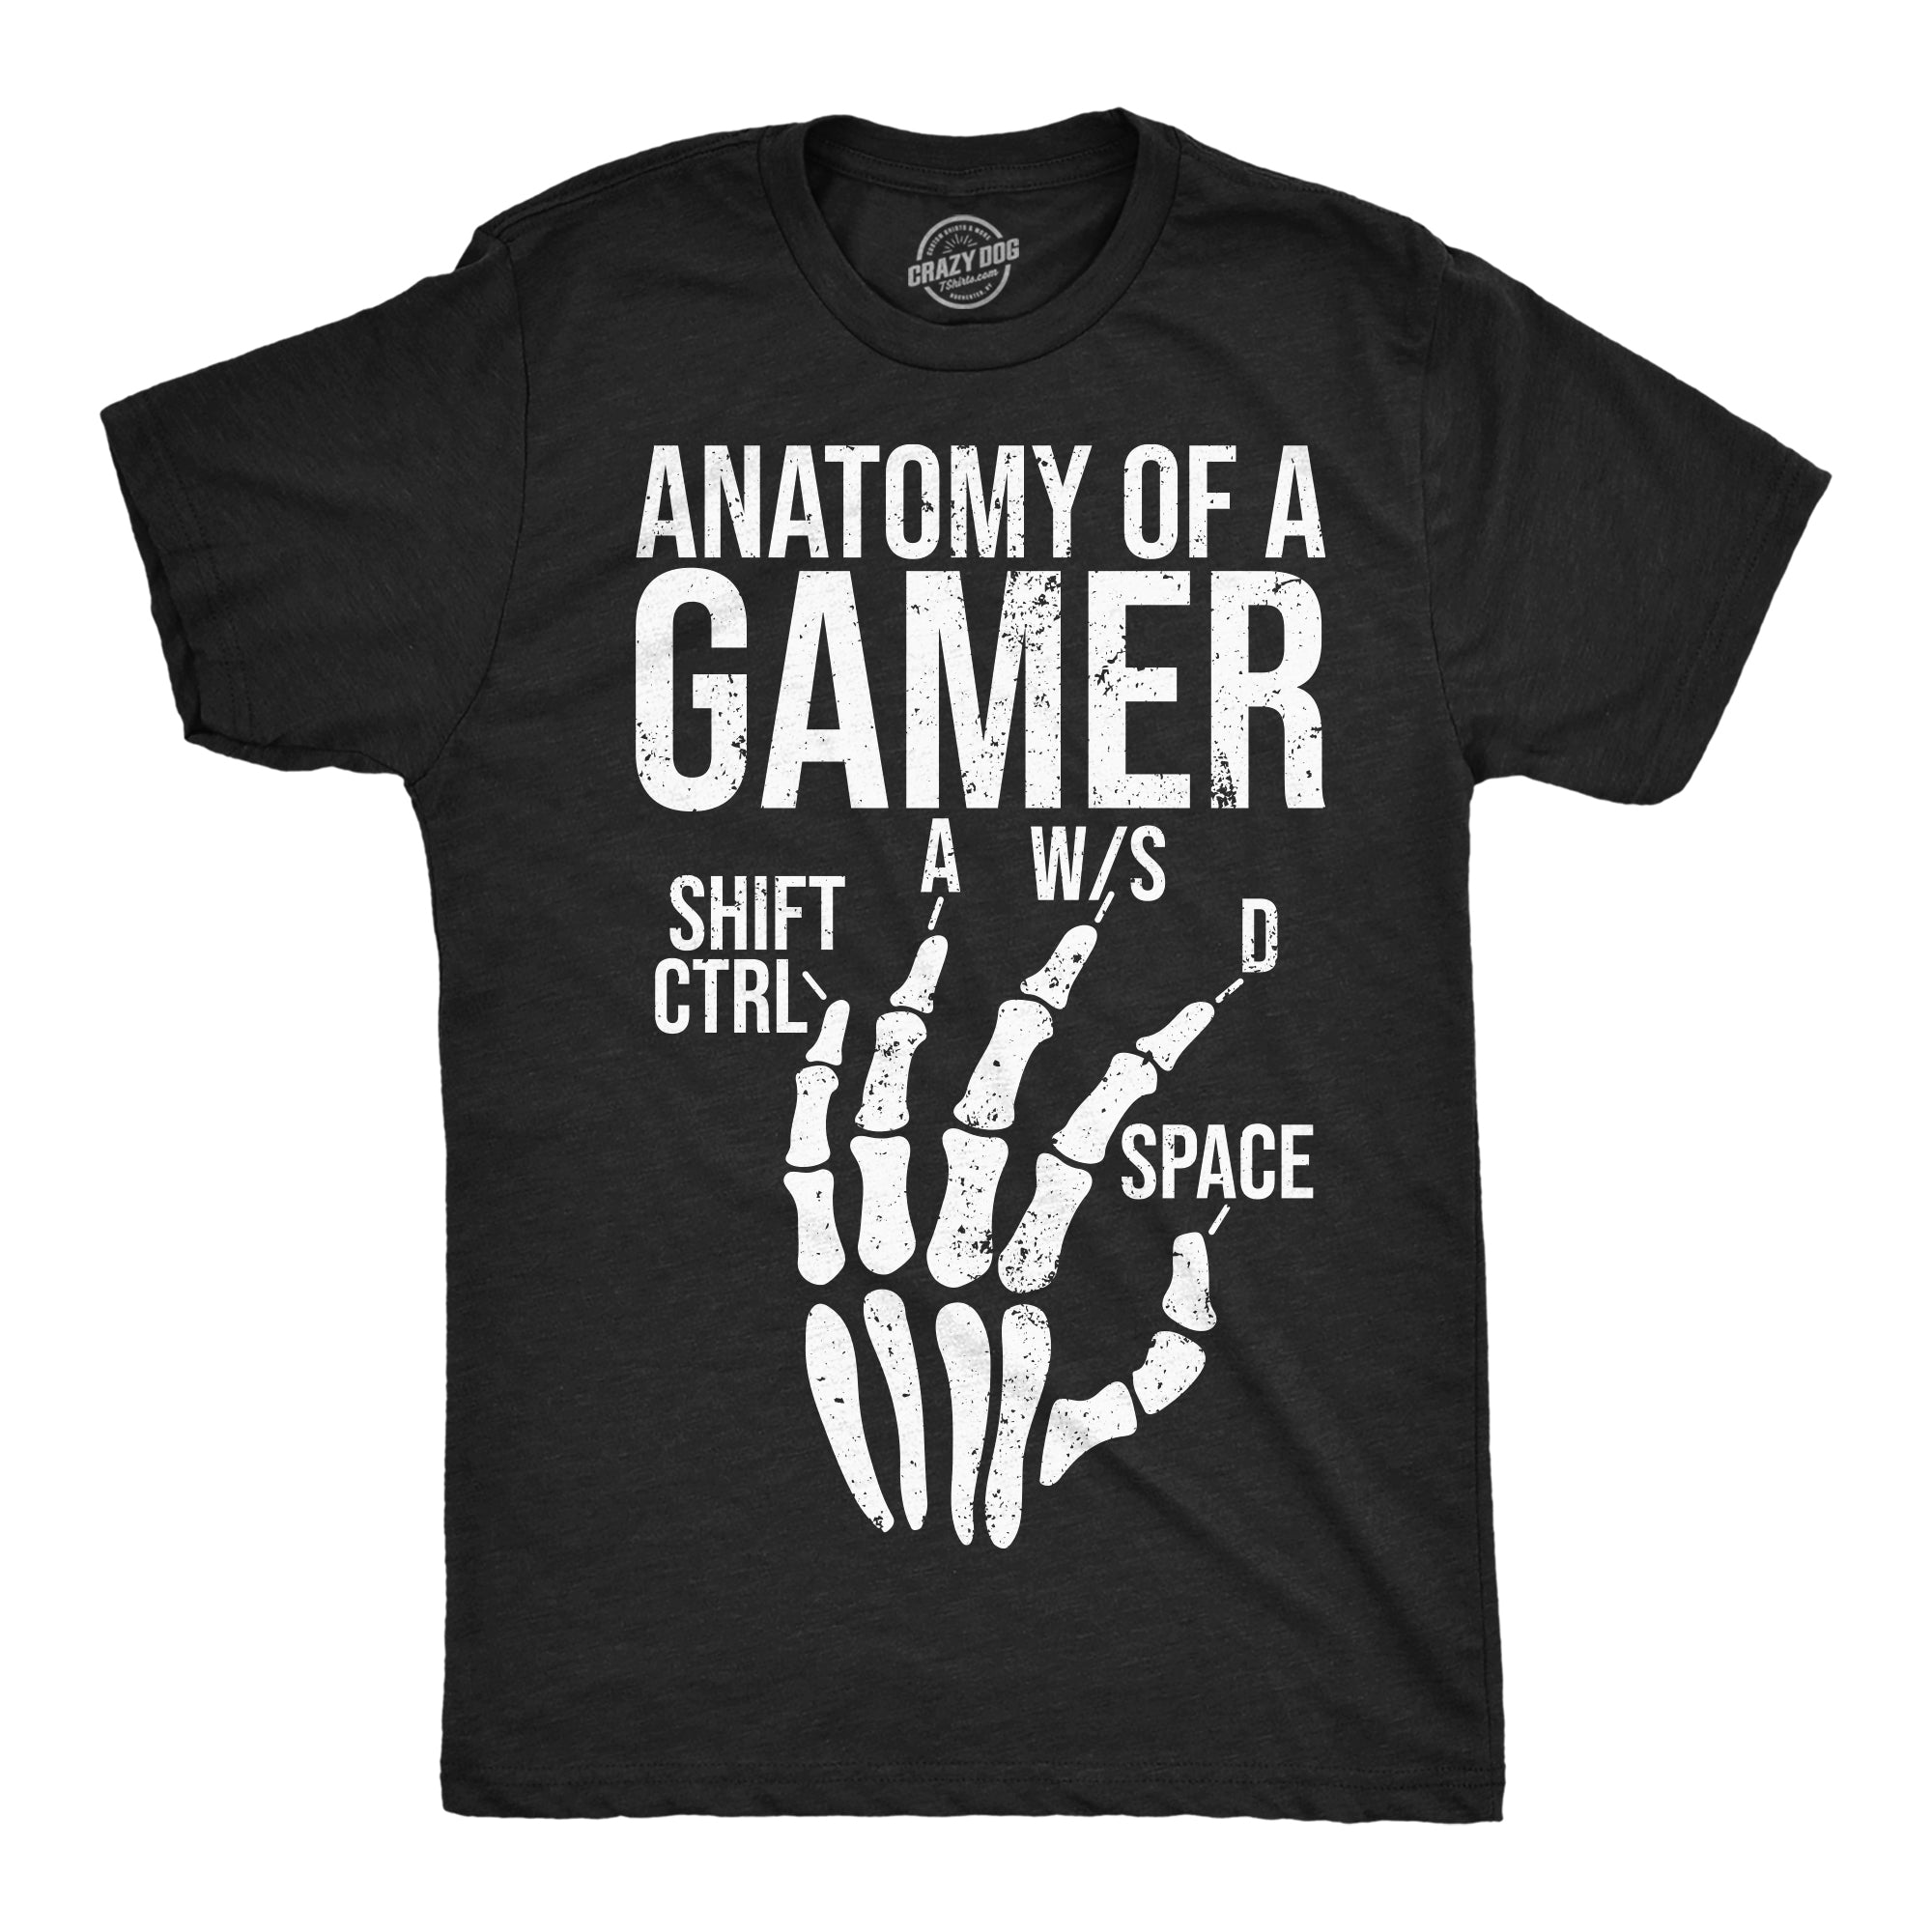 Funny Heather Black - Anatomy Of A Gamer Anatomy Of A Gamer Mens T Shirt Nerdy Video Games sarcastic Tee